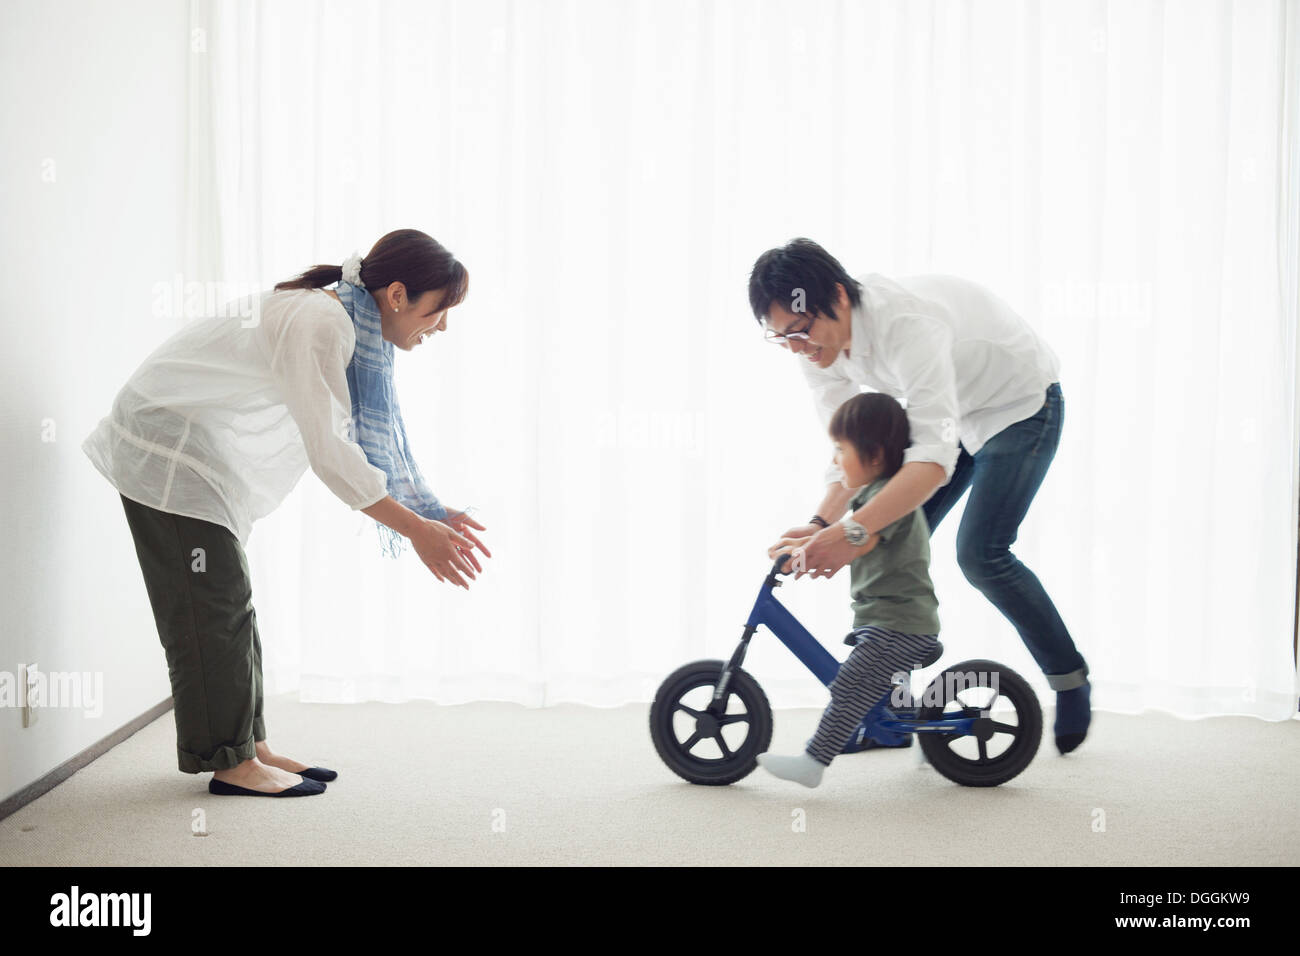 Parents with son learning to ride bicycle Stock Photo